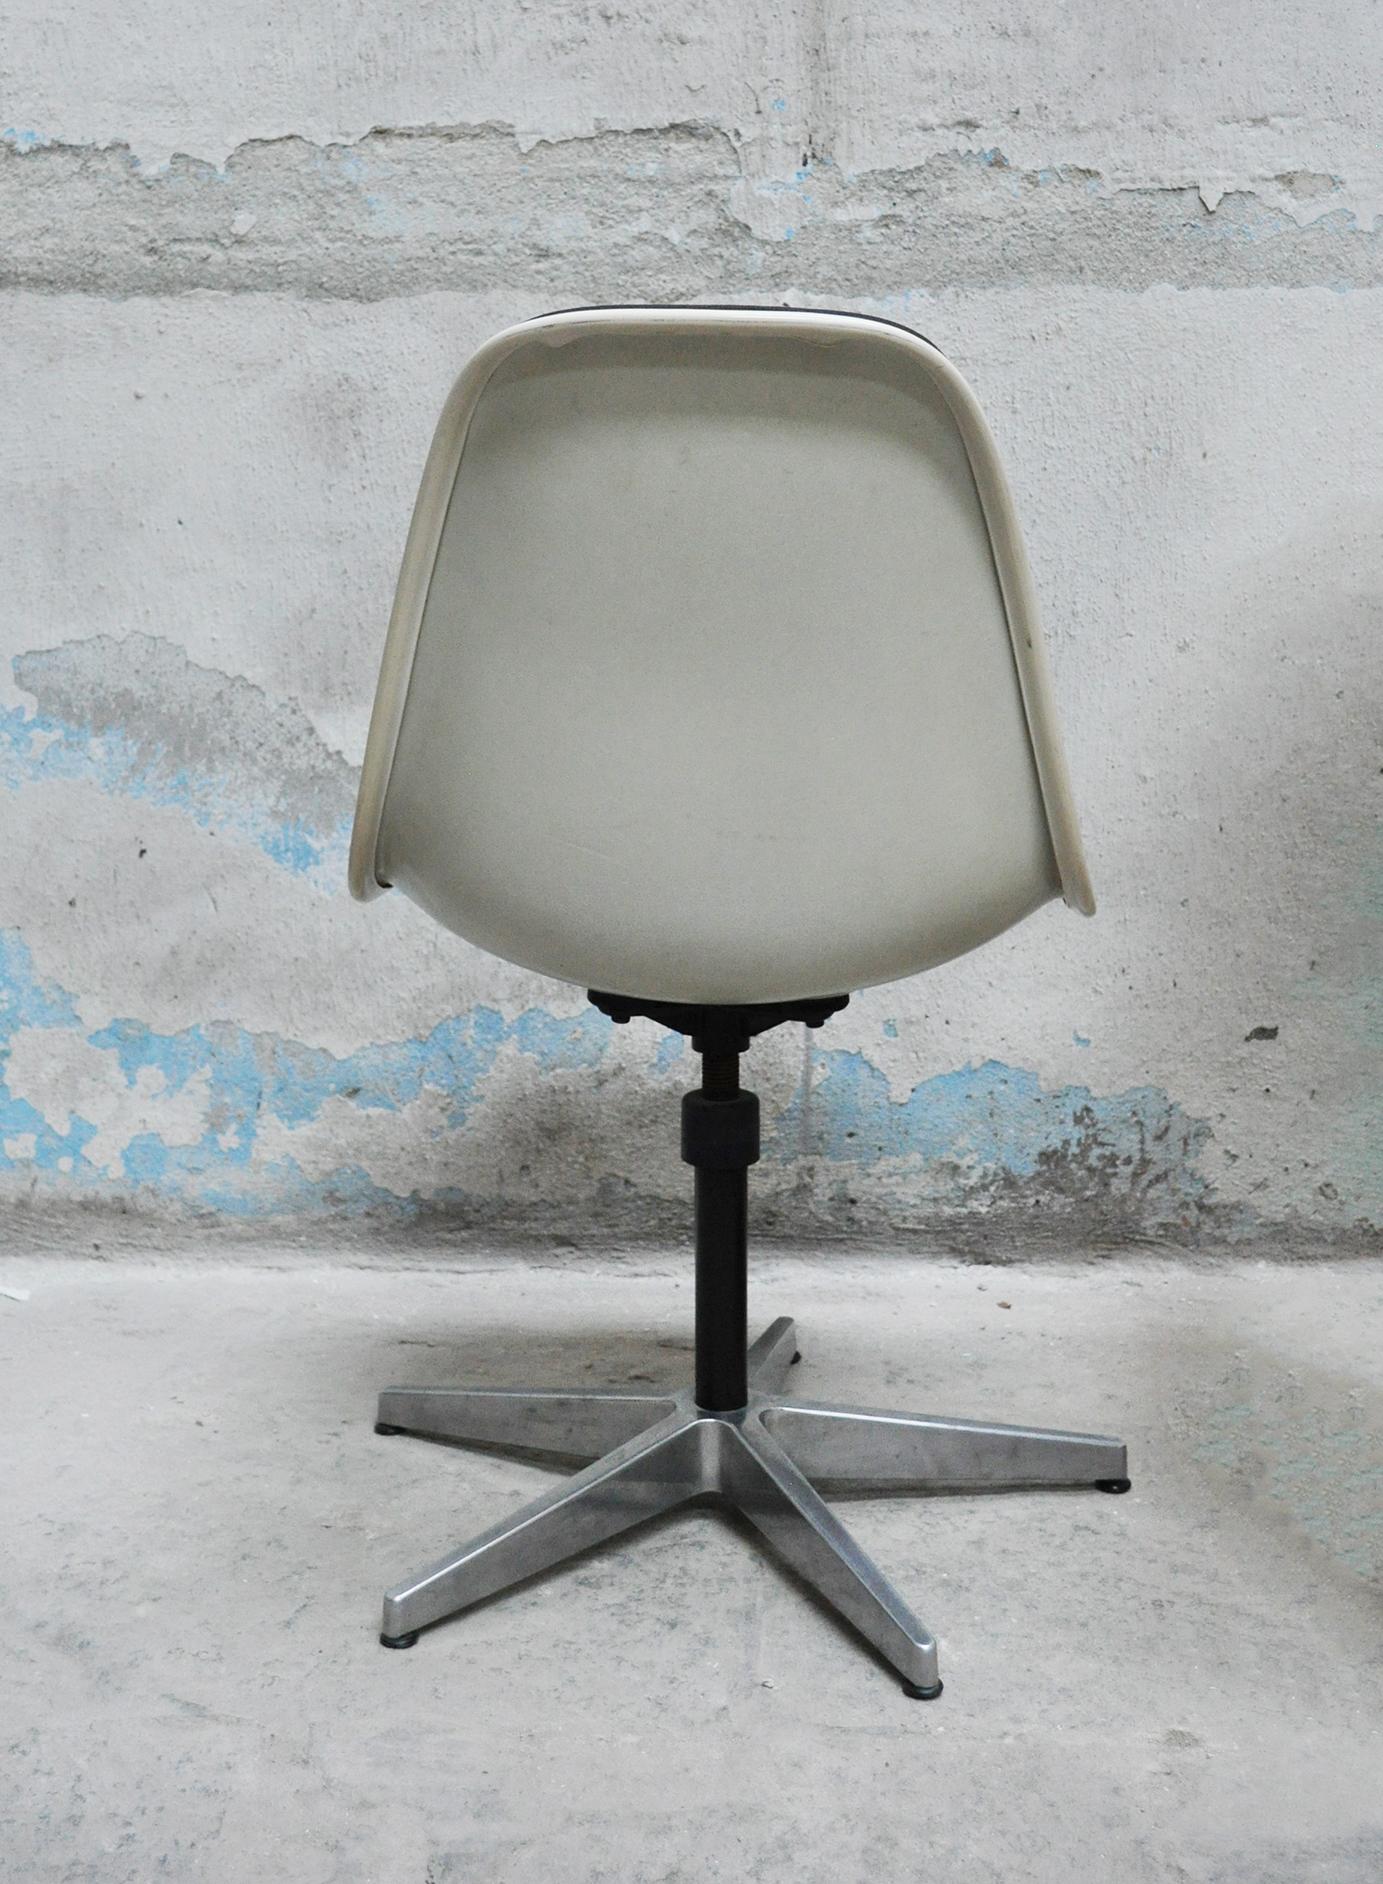 Midcentury American Dining Chairs by Charles & Ray Eames for Herman Miller 1960 For Sale 8